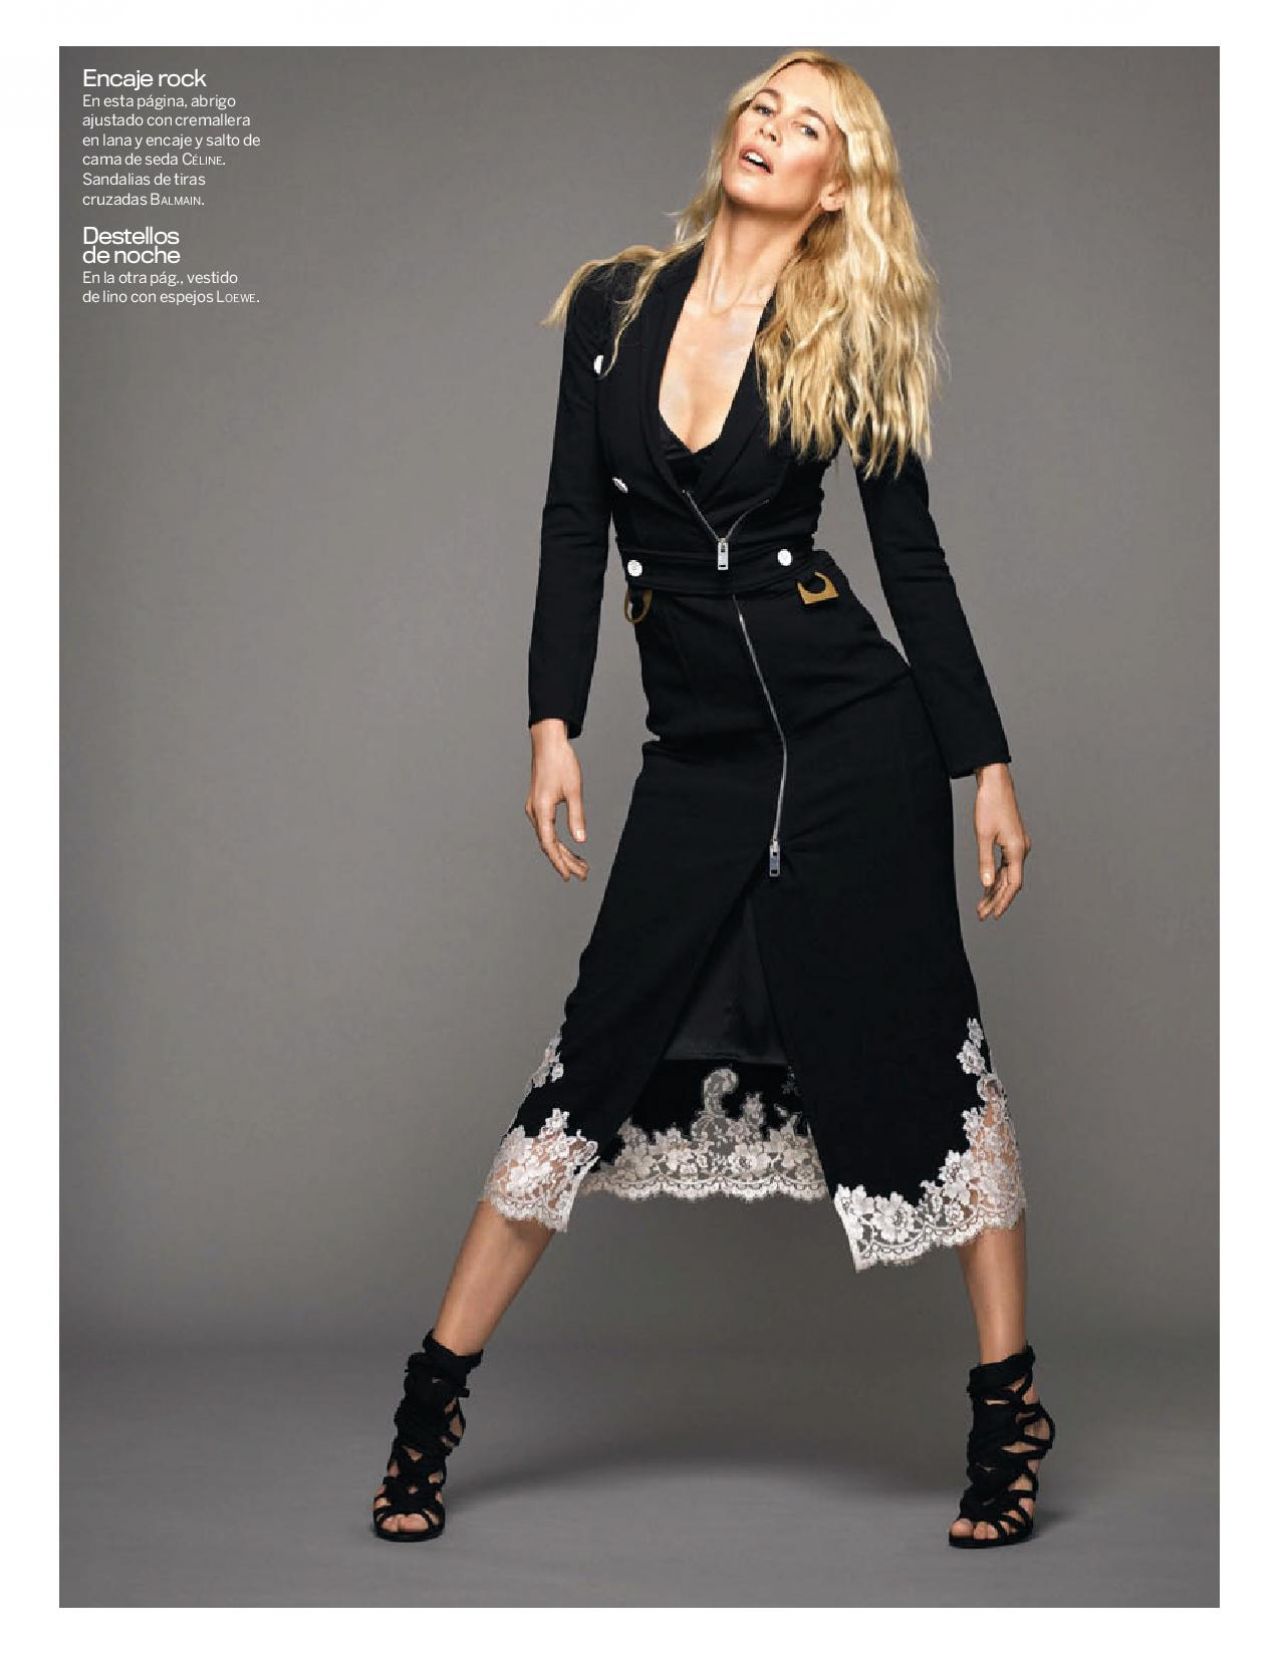 claudia-schiffer-wonder-claudia-woman-spain-july-2016-issue-17